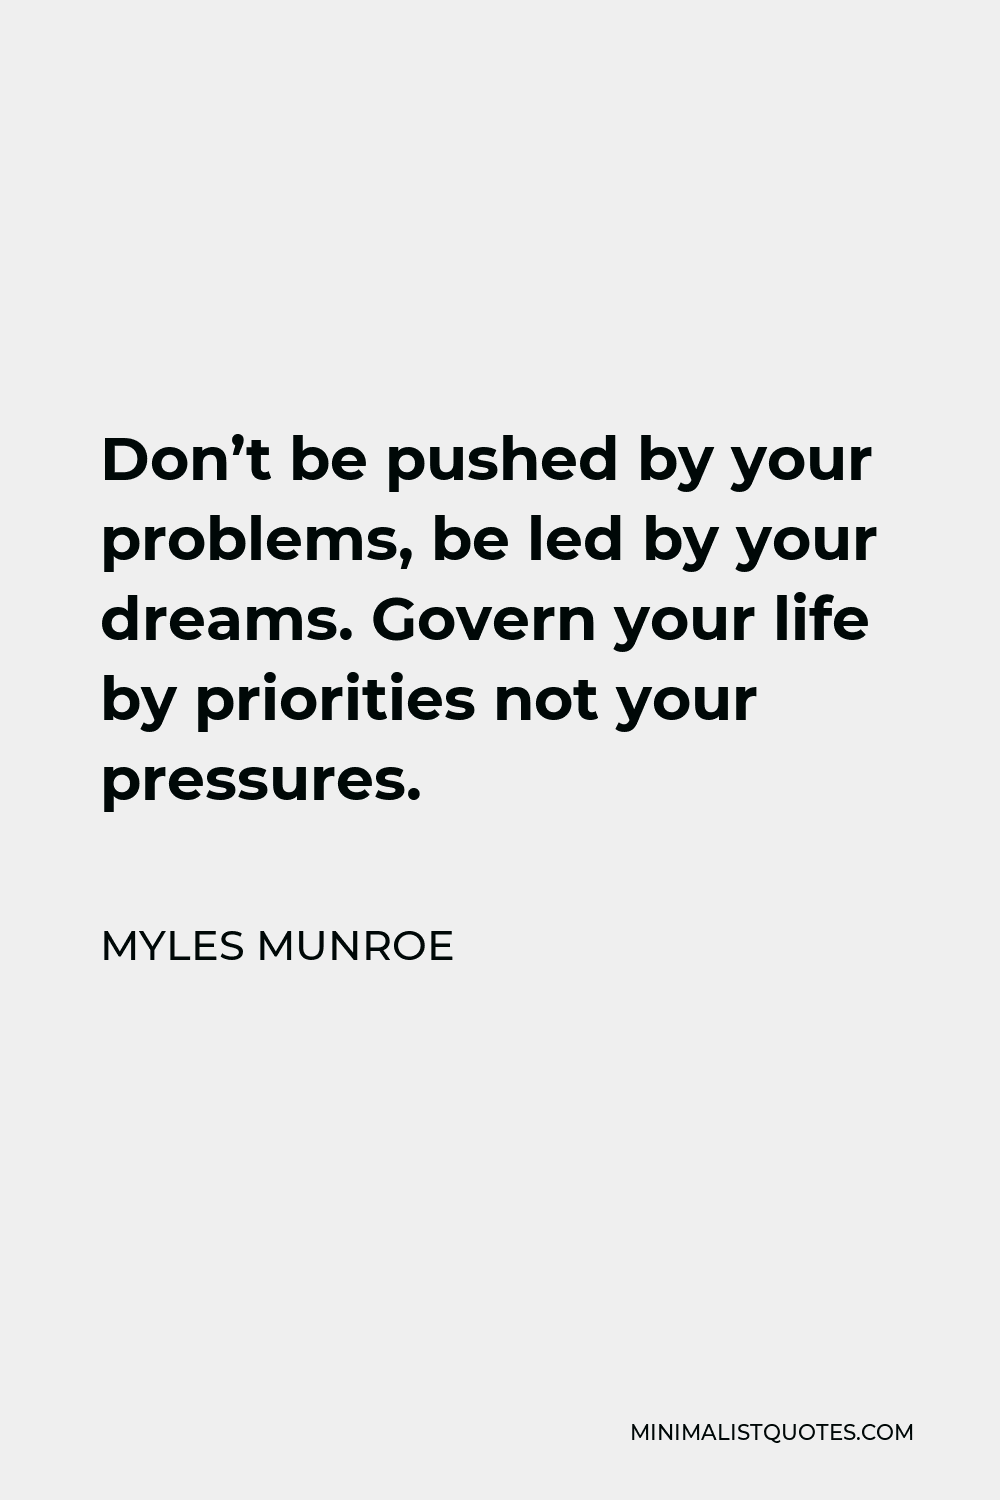 Myles Munroe Quote - Don’t be pushed by your problems, be led by your dreams. Govern your life by priorities not your pressures.